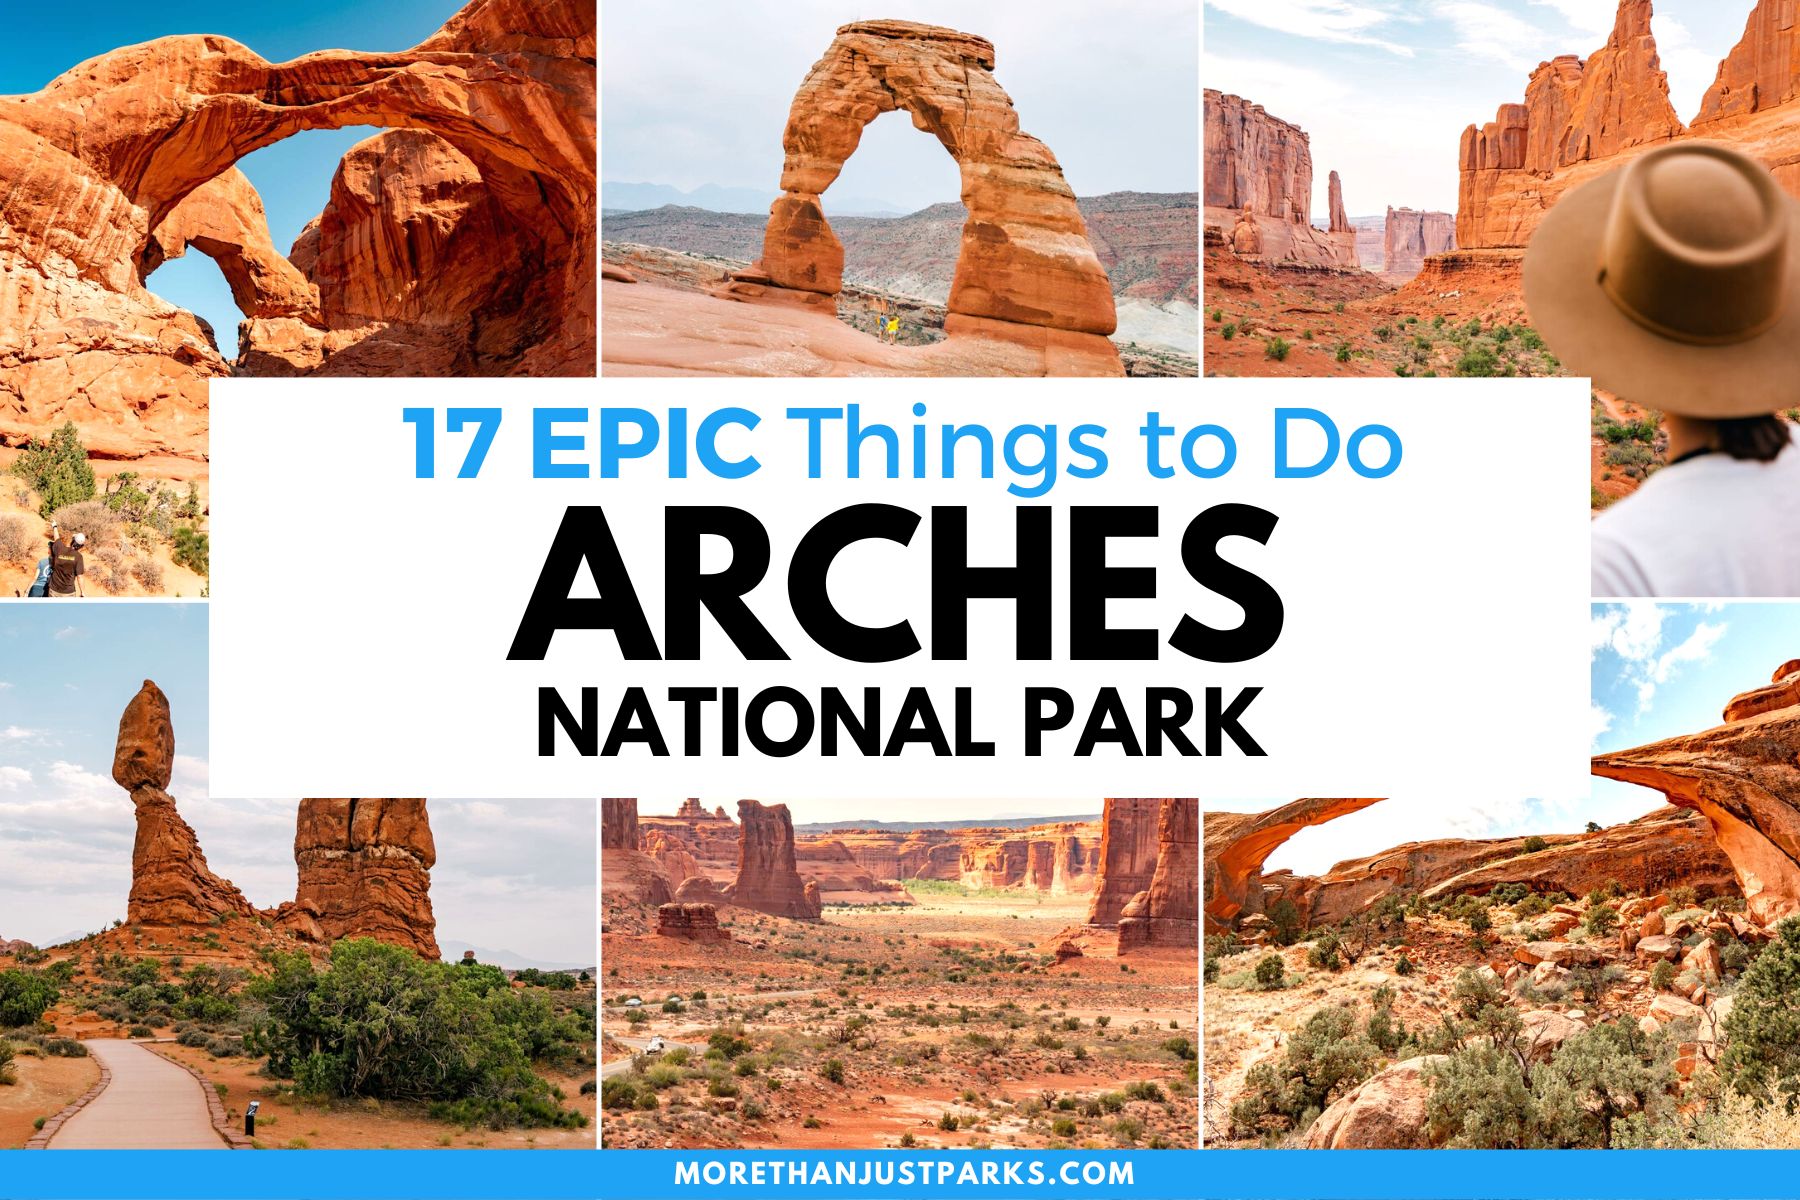 things to do arches national park, things to do arches utah